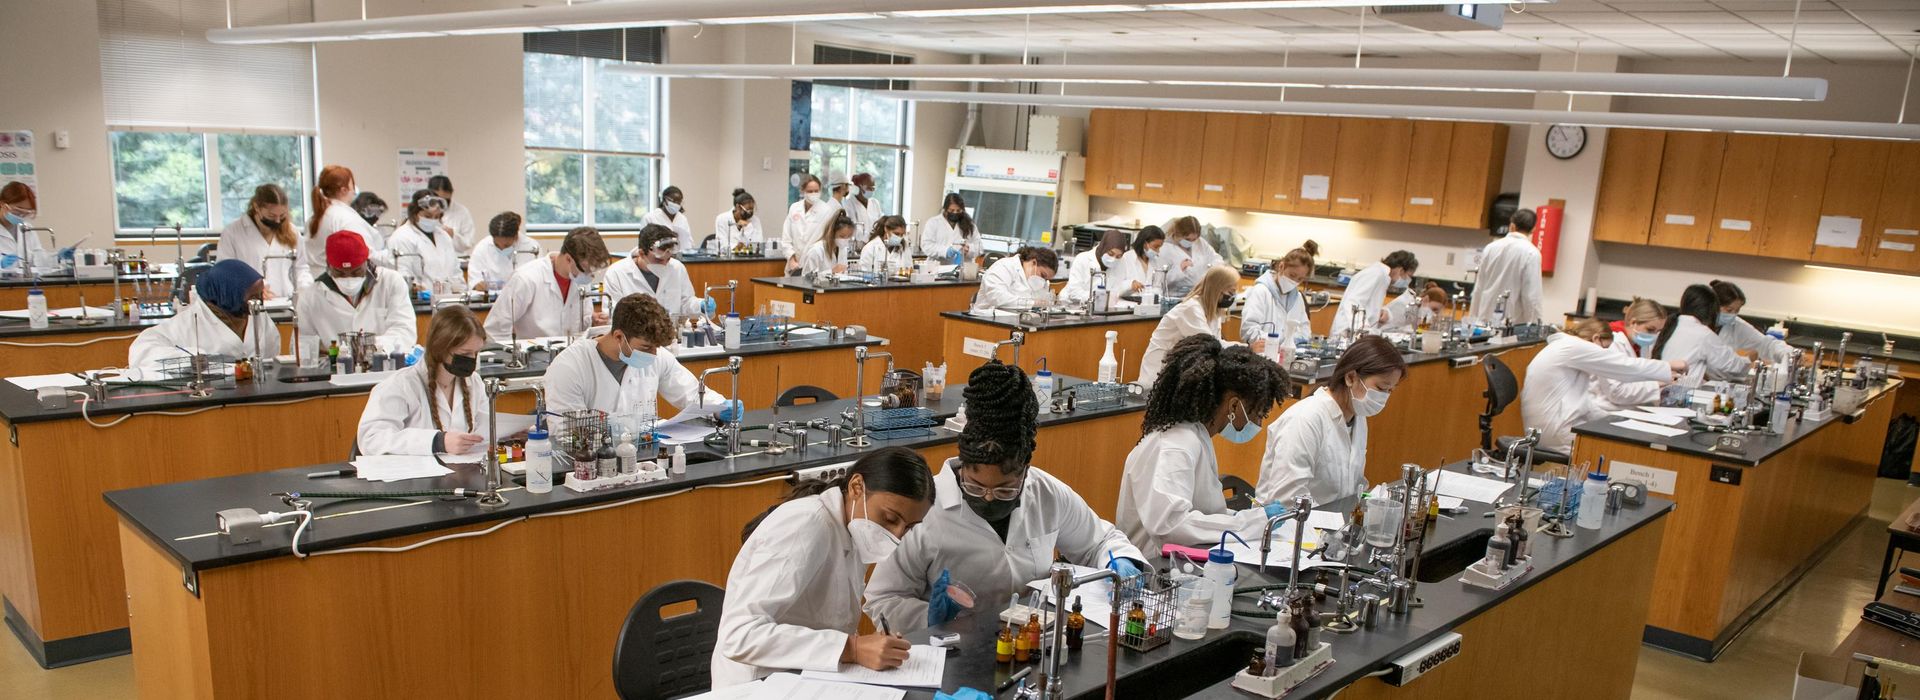 MCPHS students in the lab. 